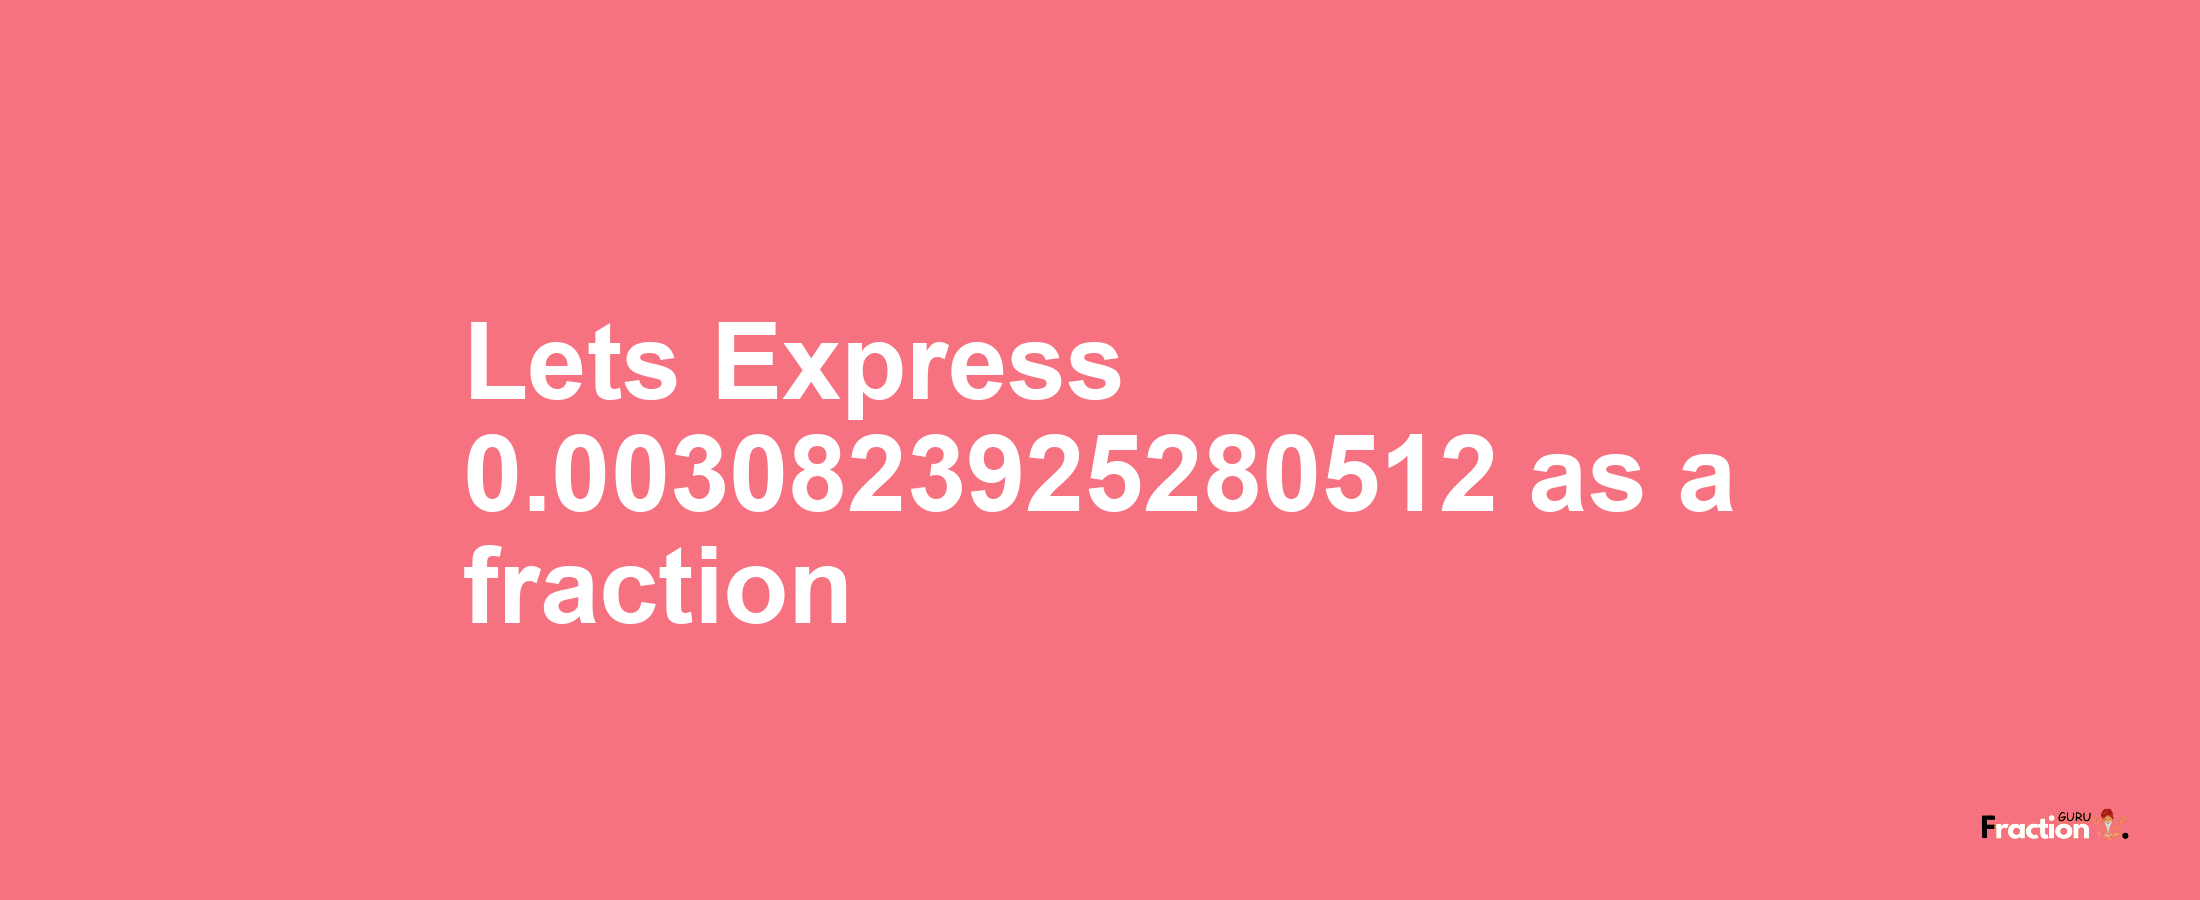 Lets Express 0.0030823925280512 as afraction